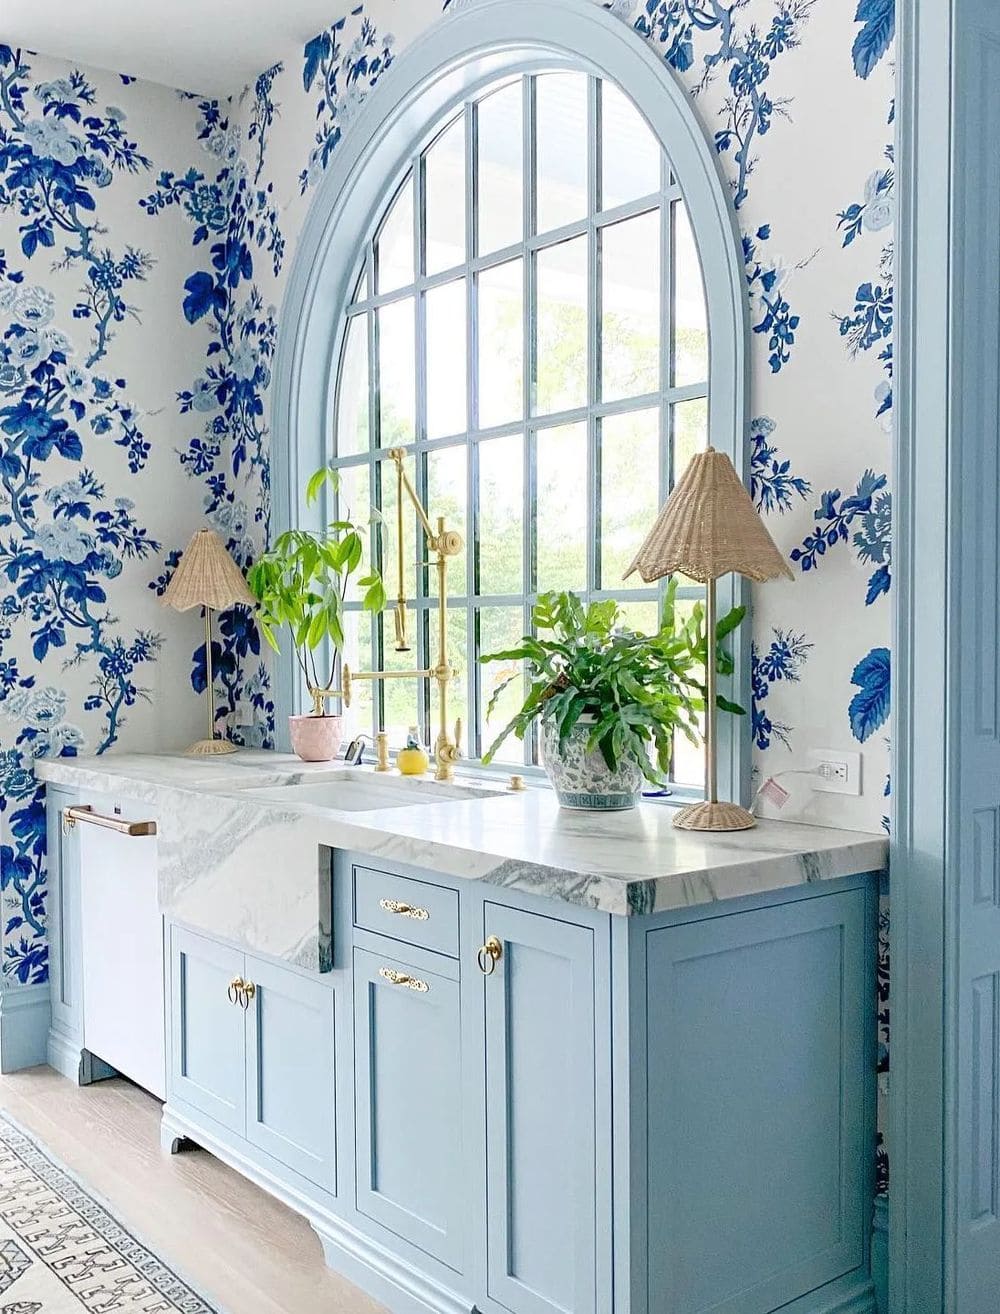 Image of a blue kitchen with blue floral wallpaper. The kitchen features light blue cabinets and white countertops, with the wallpaper adding a decorative touch to the room. The wallpaper has a floral pattern in shades of blue and white, which complements the color scheme of the kitchen. The kitchen is well-lit with natural light, and pots filled with plants sit on the countertop adding a pop of color to the space.